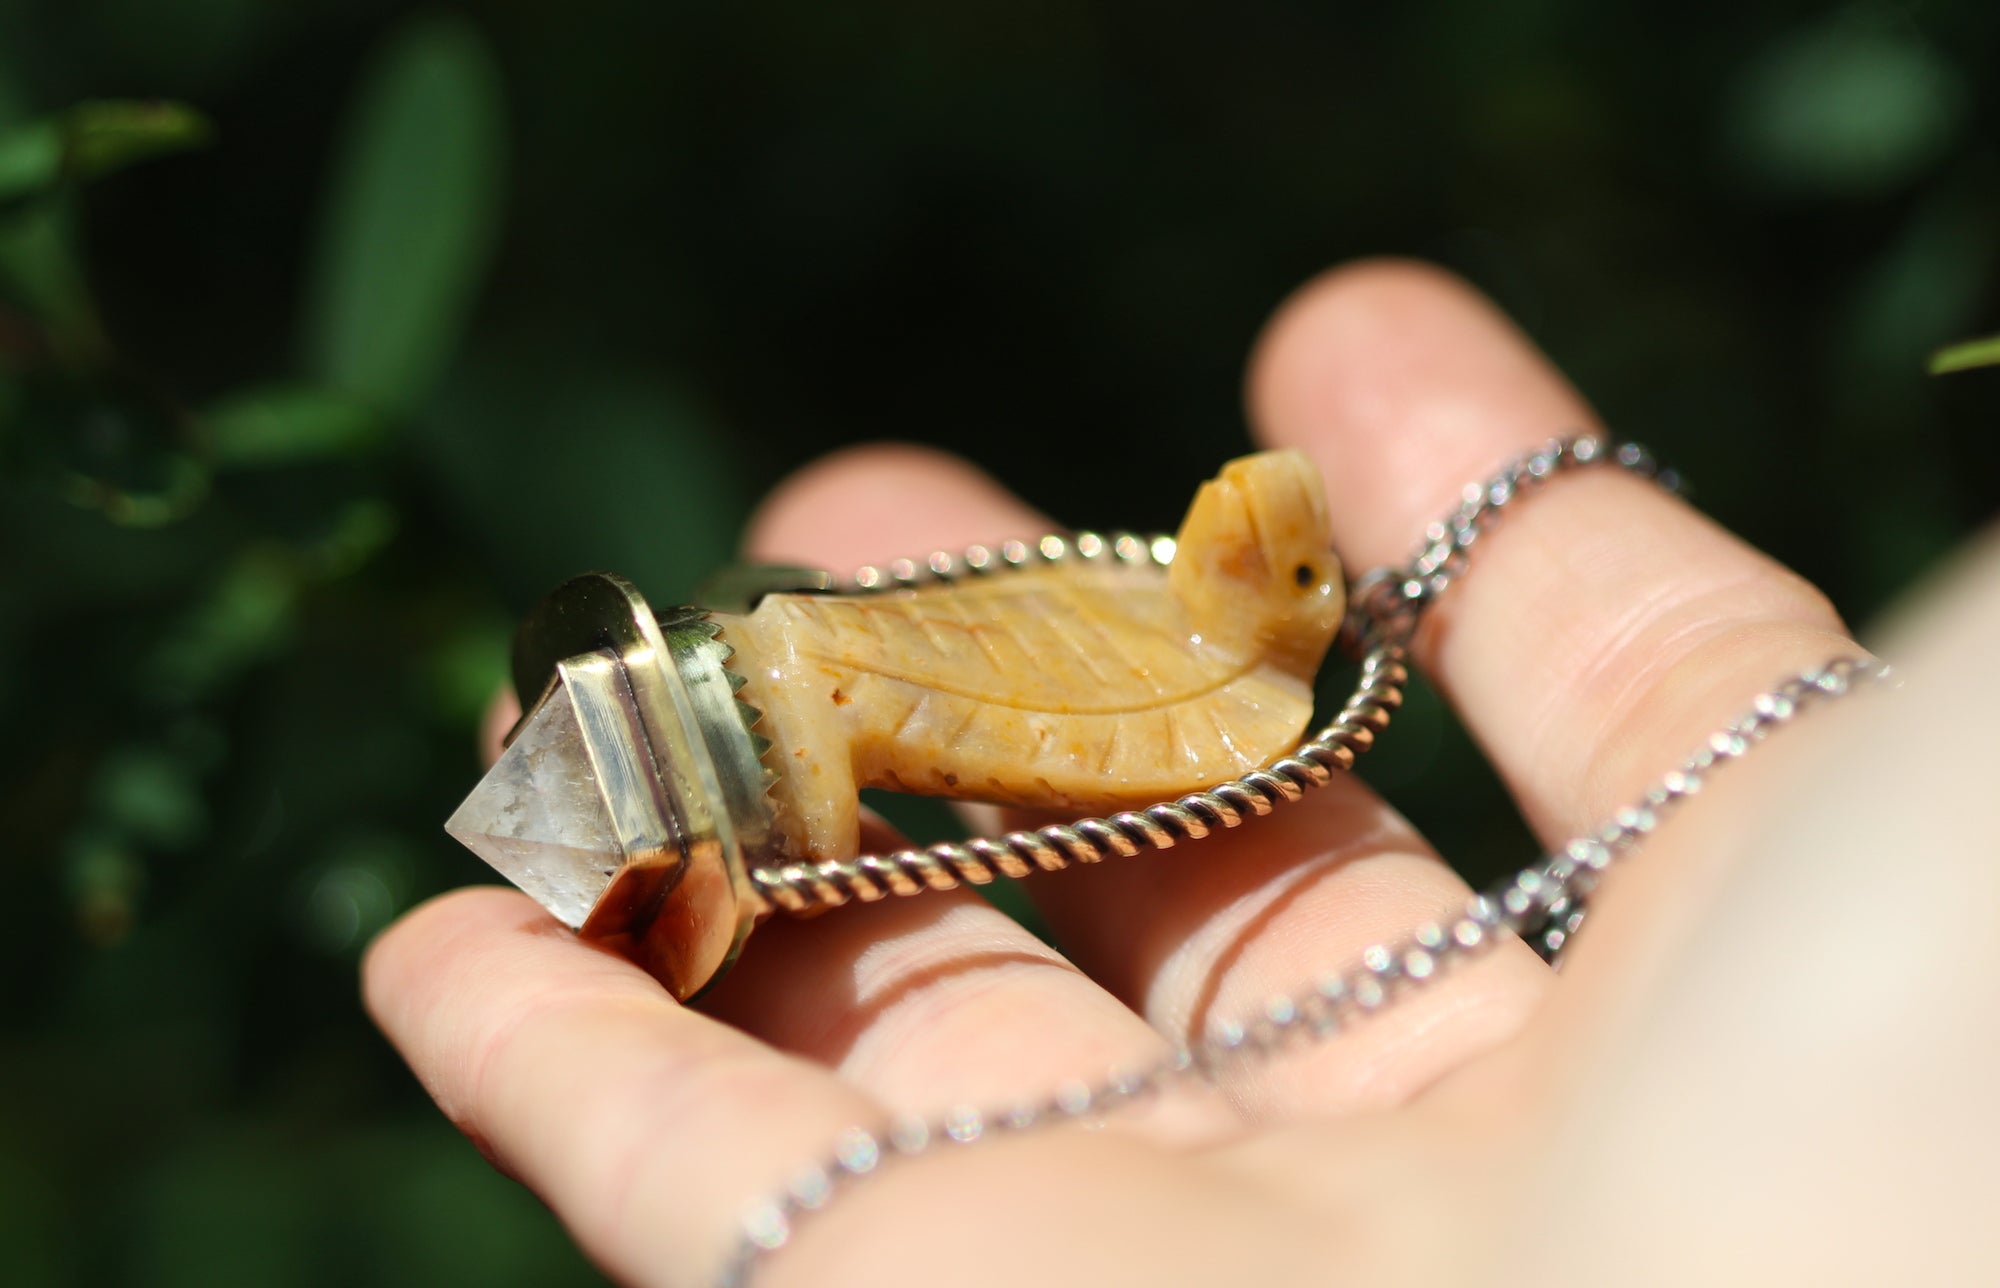 SERPENT TREASURE Handmade Brass Necklace with Agate & Clear Quartz